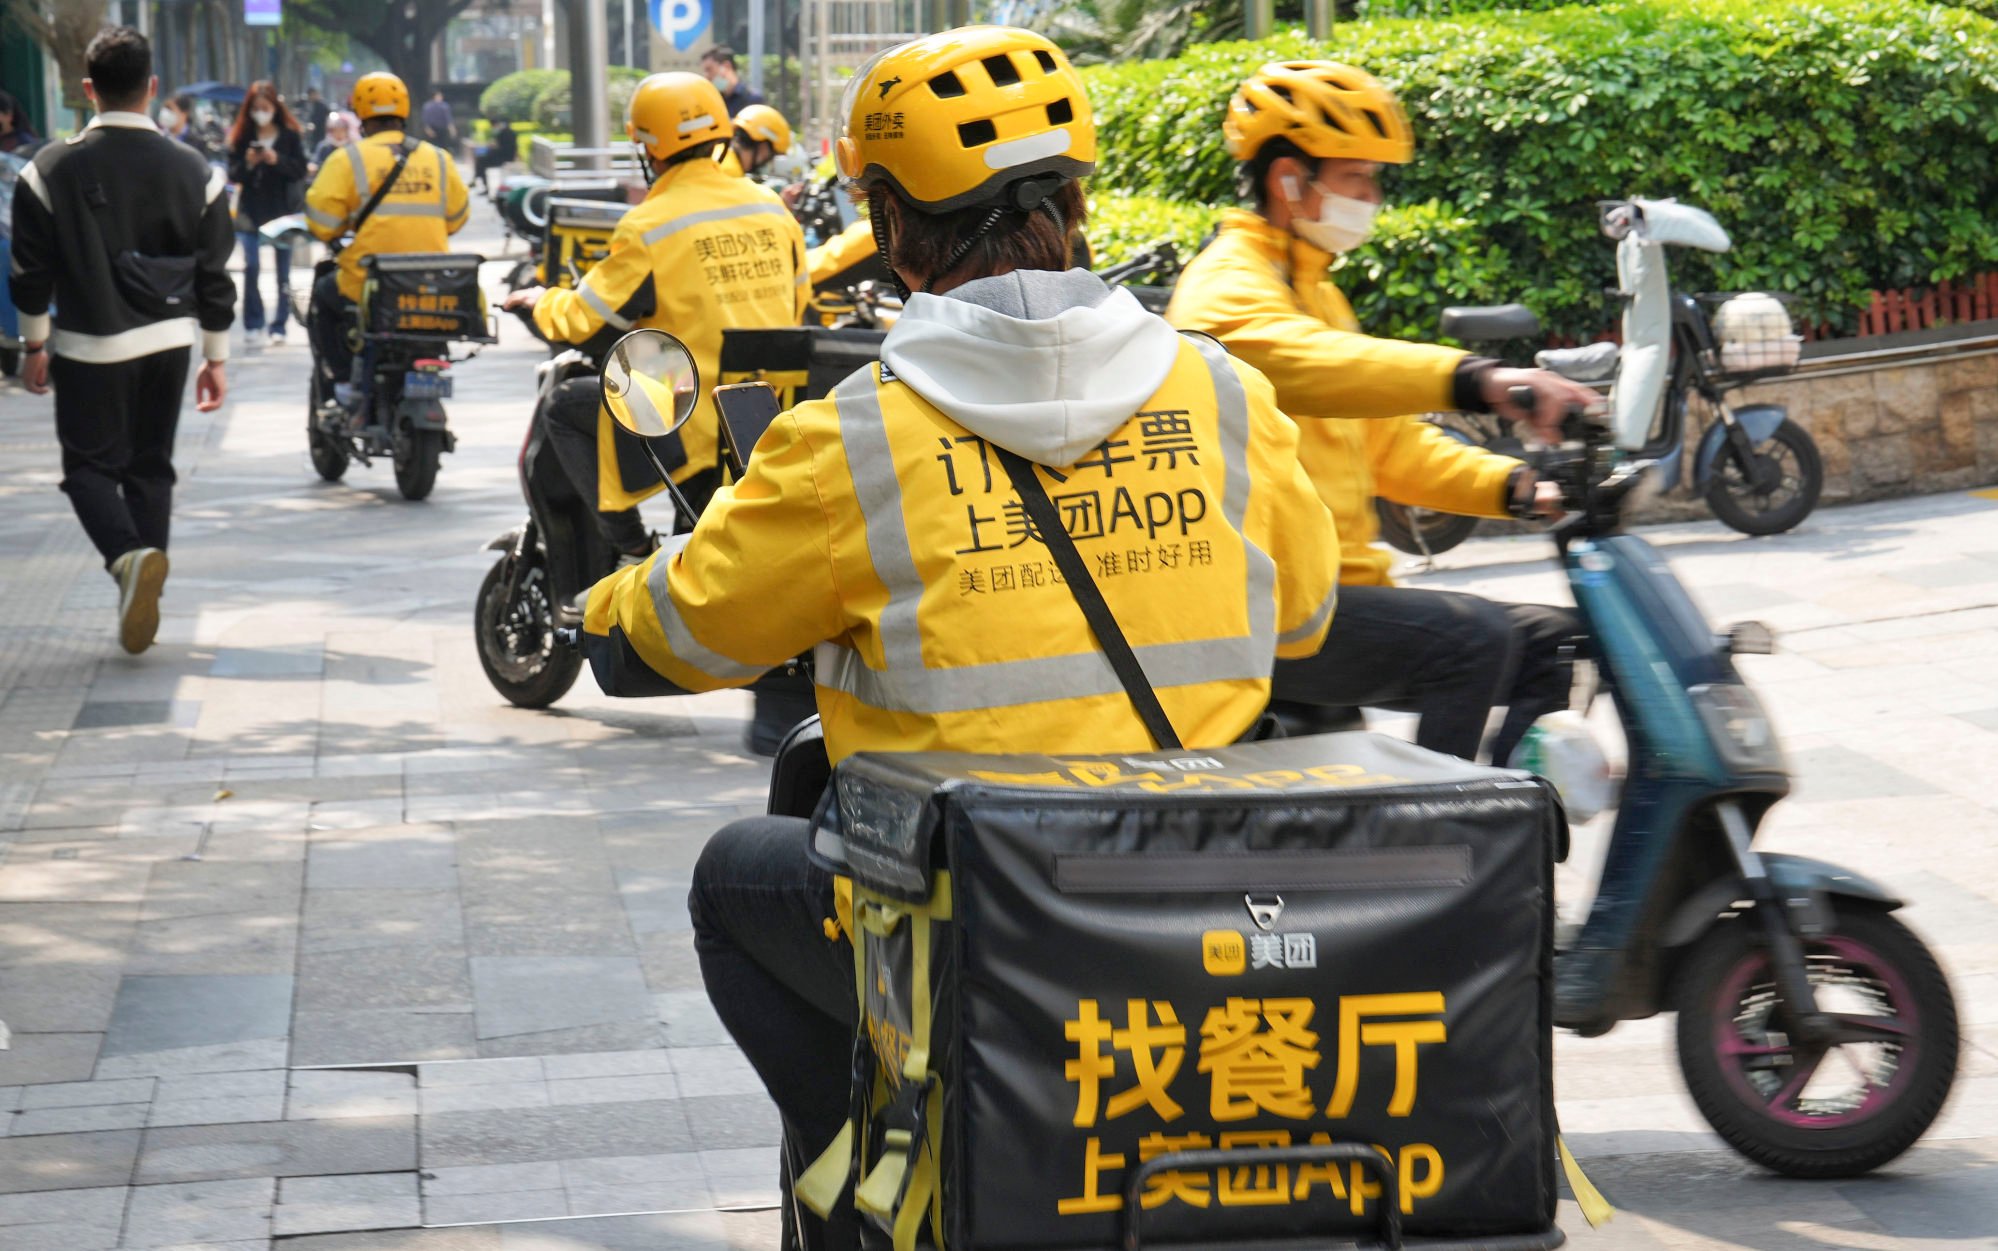 Several Meituan riders are seen on their way to deliver takeaway food to various customers at a busy street in Guangzhou, capital of southern Guangdong province, on February 23, 2023. Photo: Elson Li